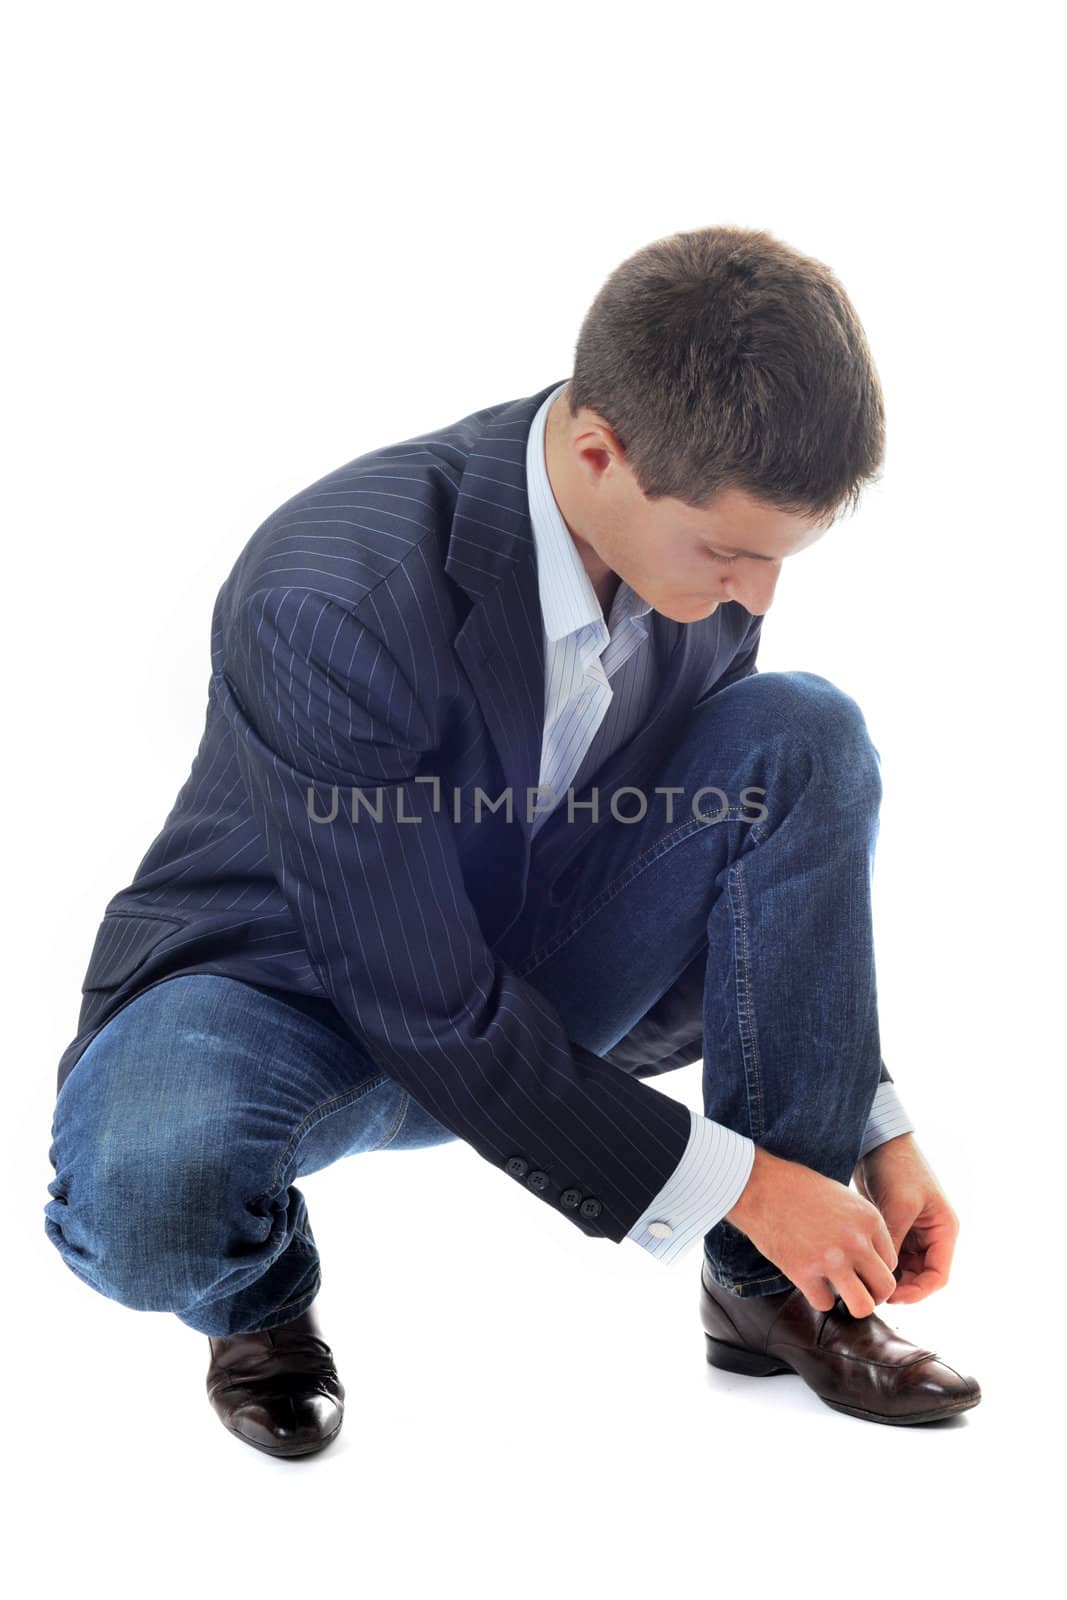 young business man lace up his shoes in front of white background